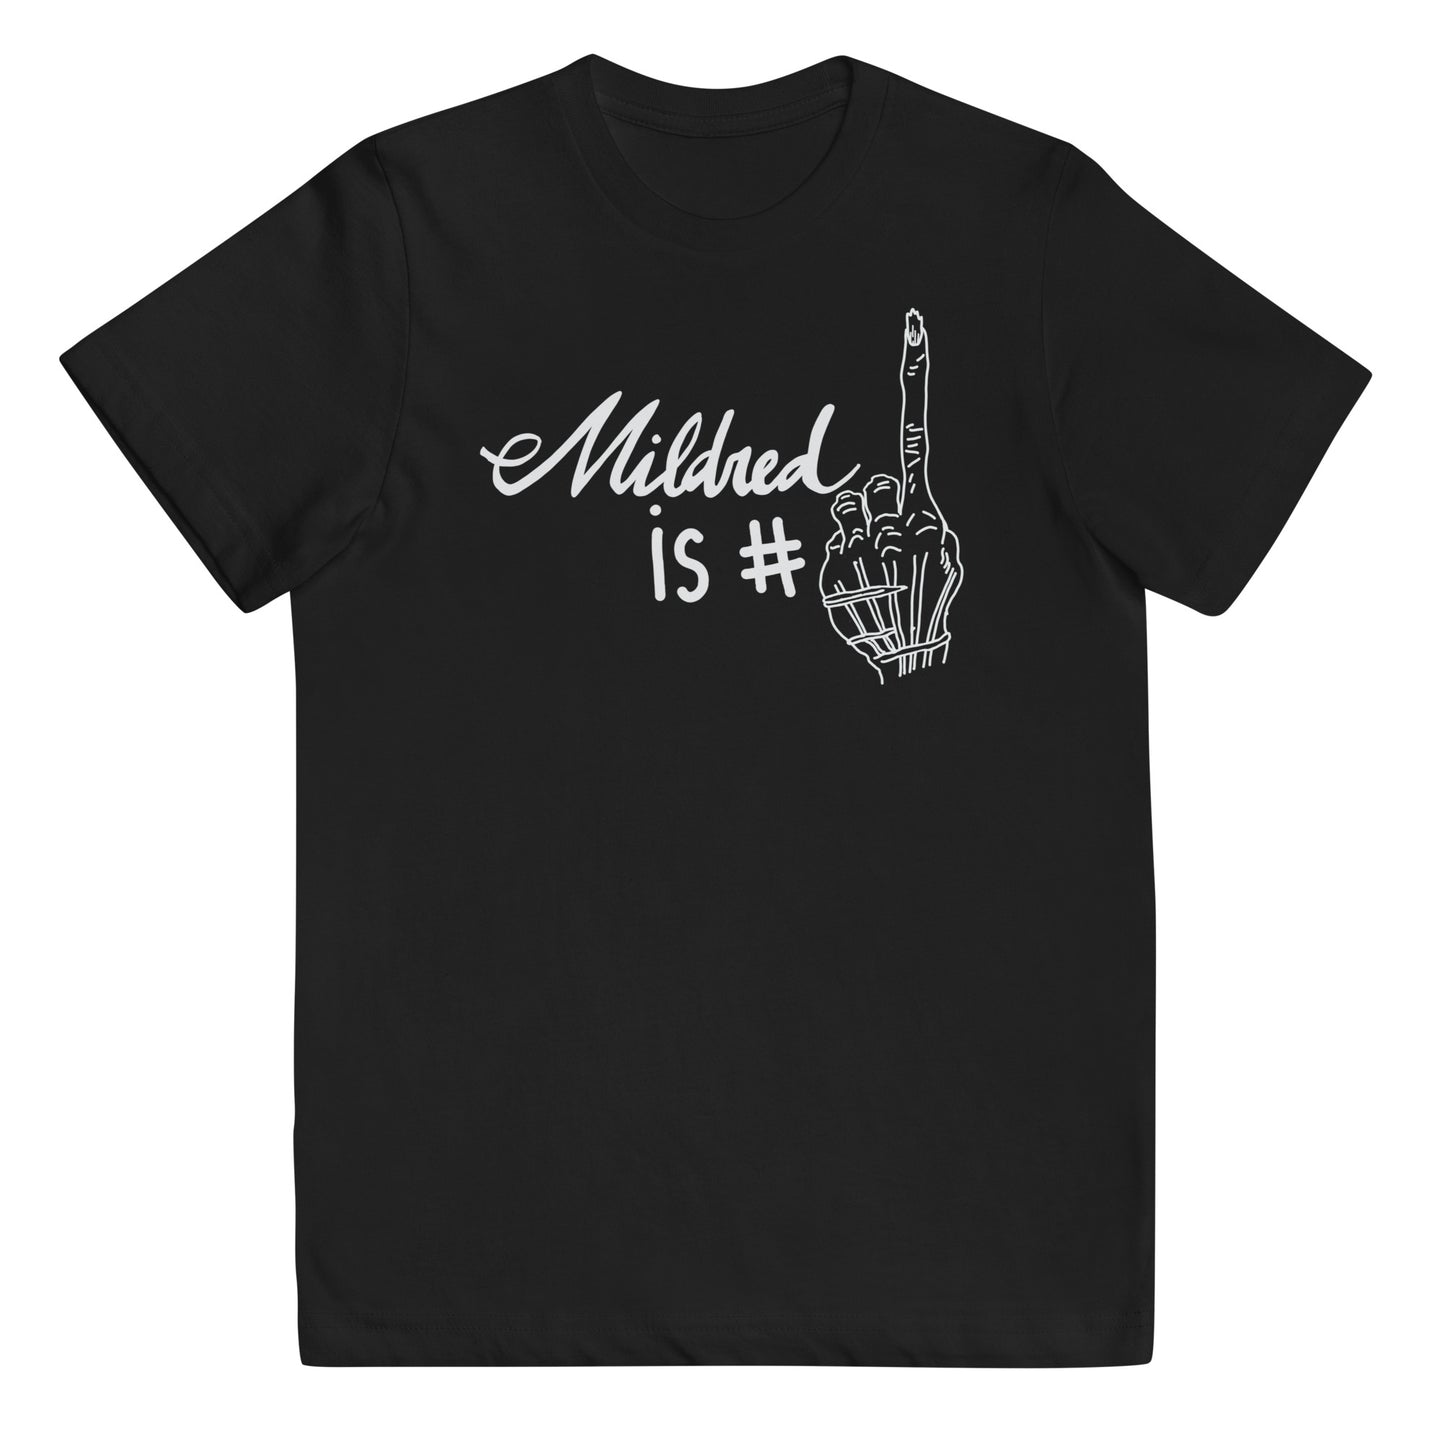 Mildred is #1 Youth Jersey T-Shirt